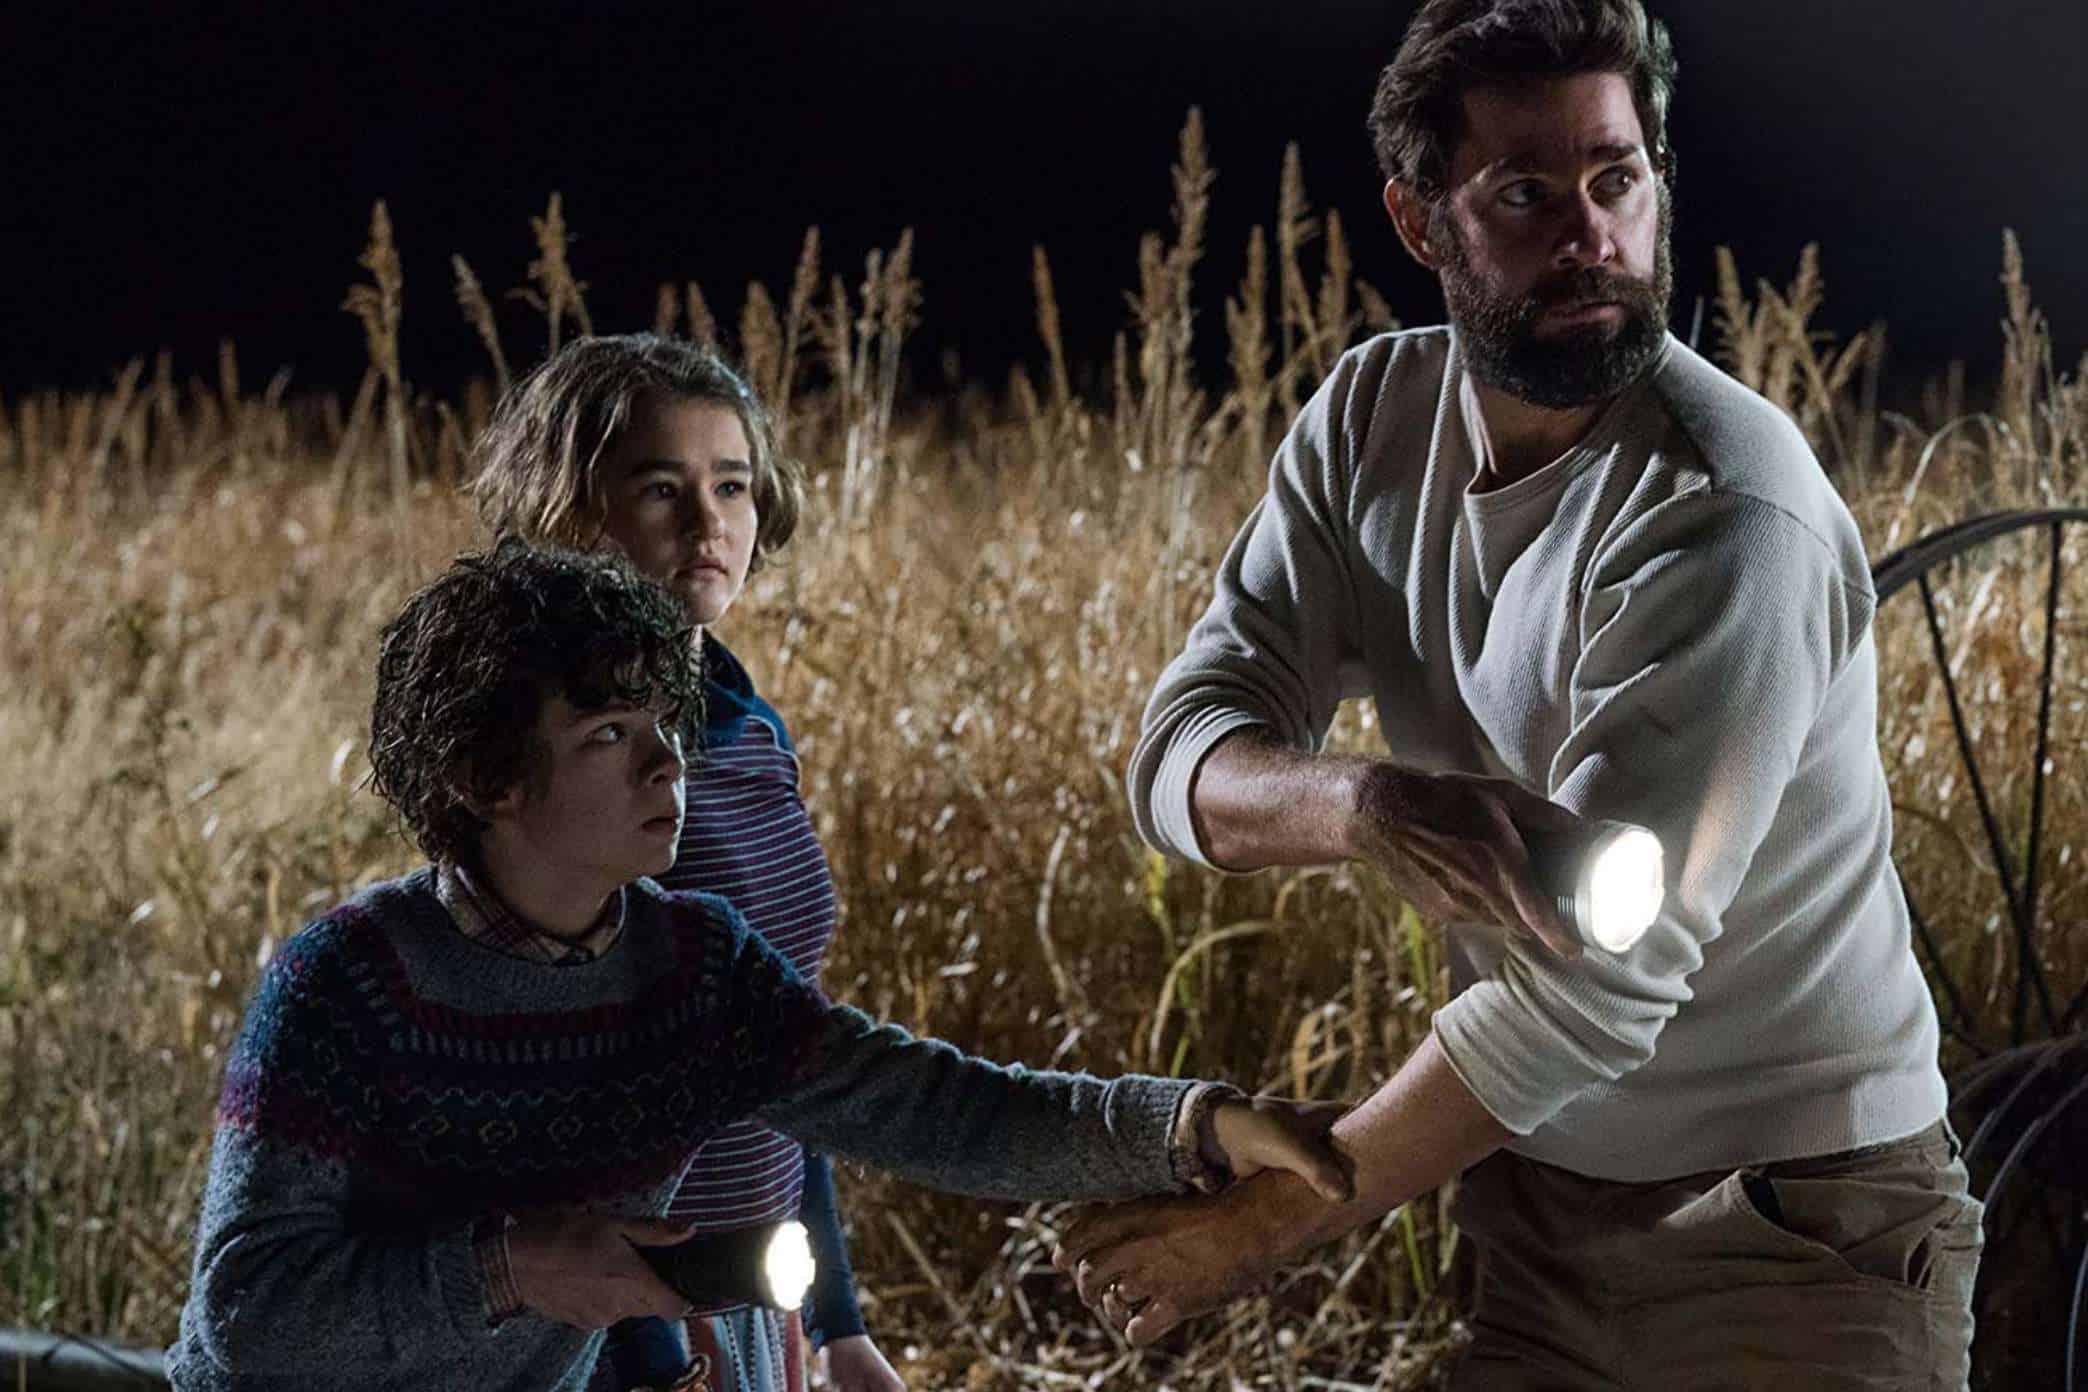 Best Movies if You Like A Quiet Place